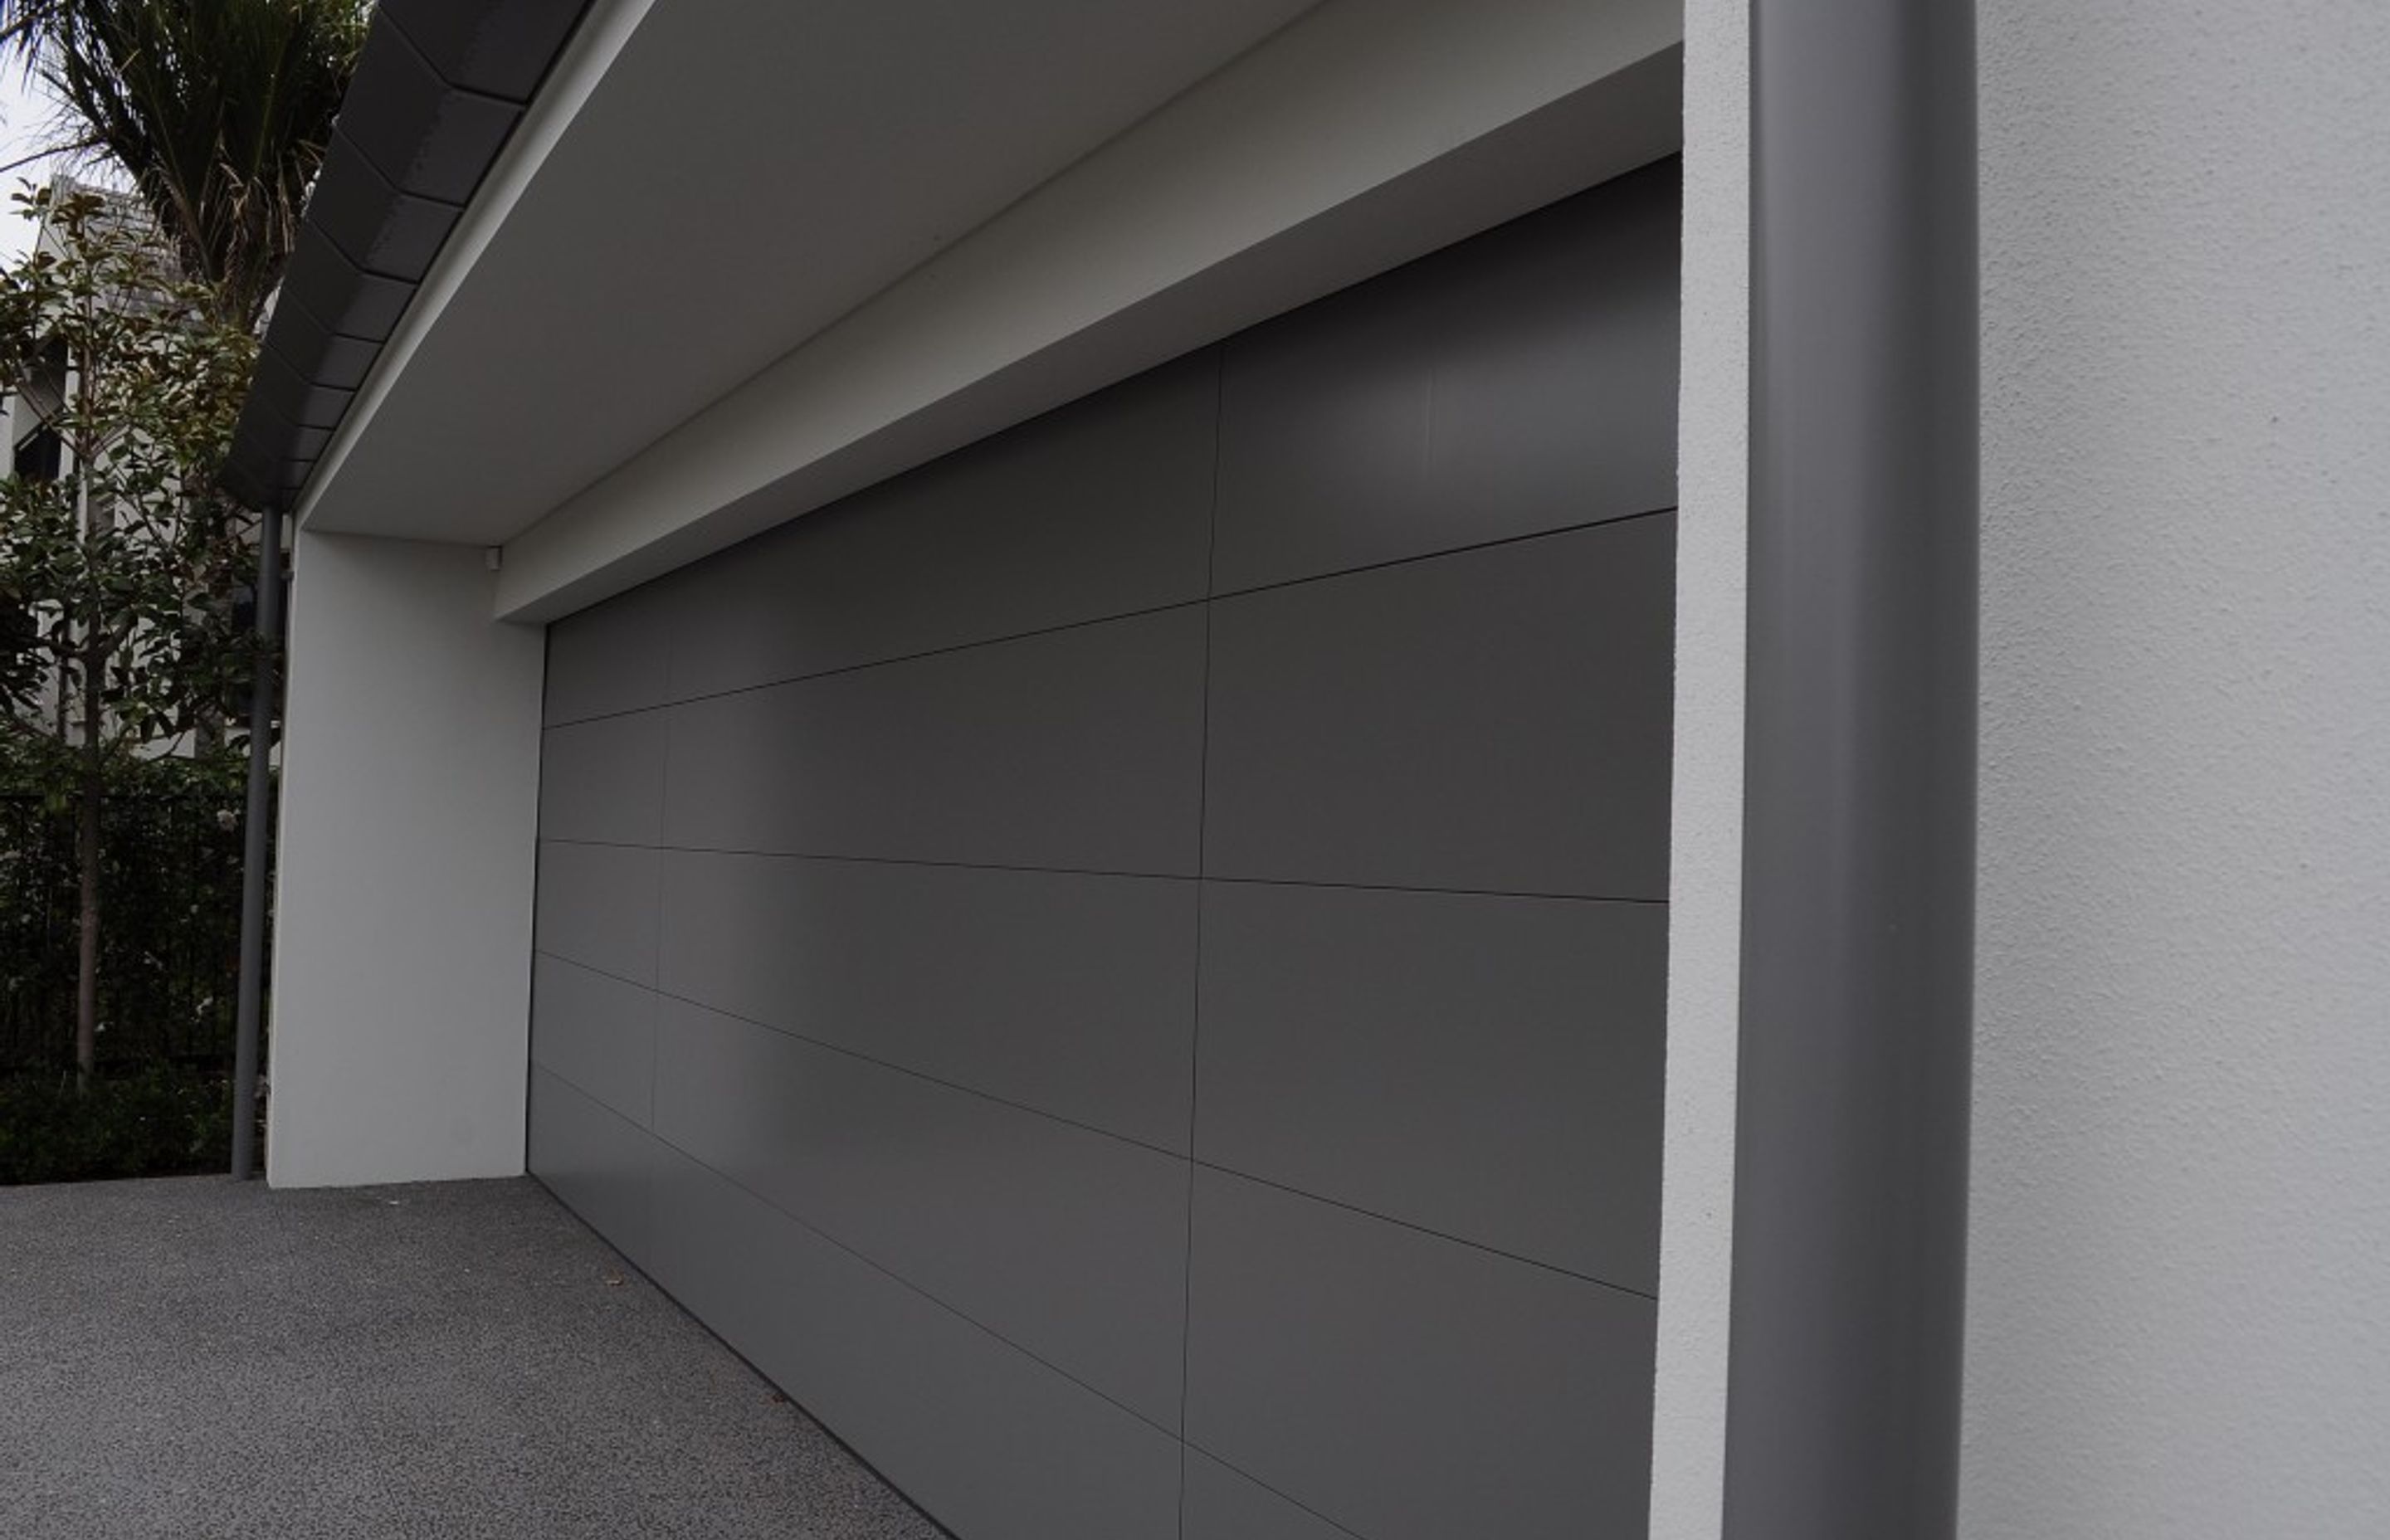 Altec Garage Doors are aesthetically pleasing, weather resistant and will not rust